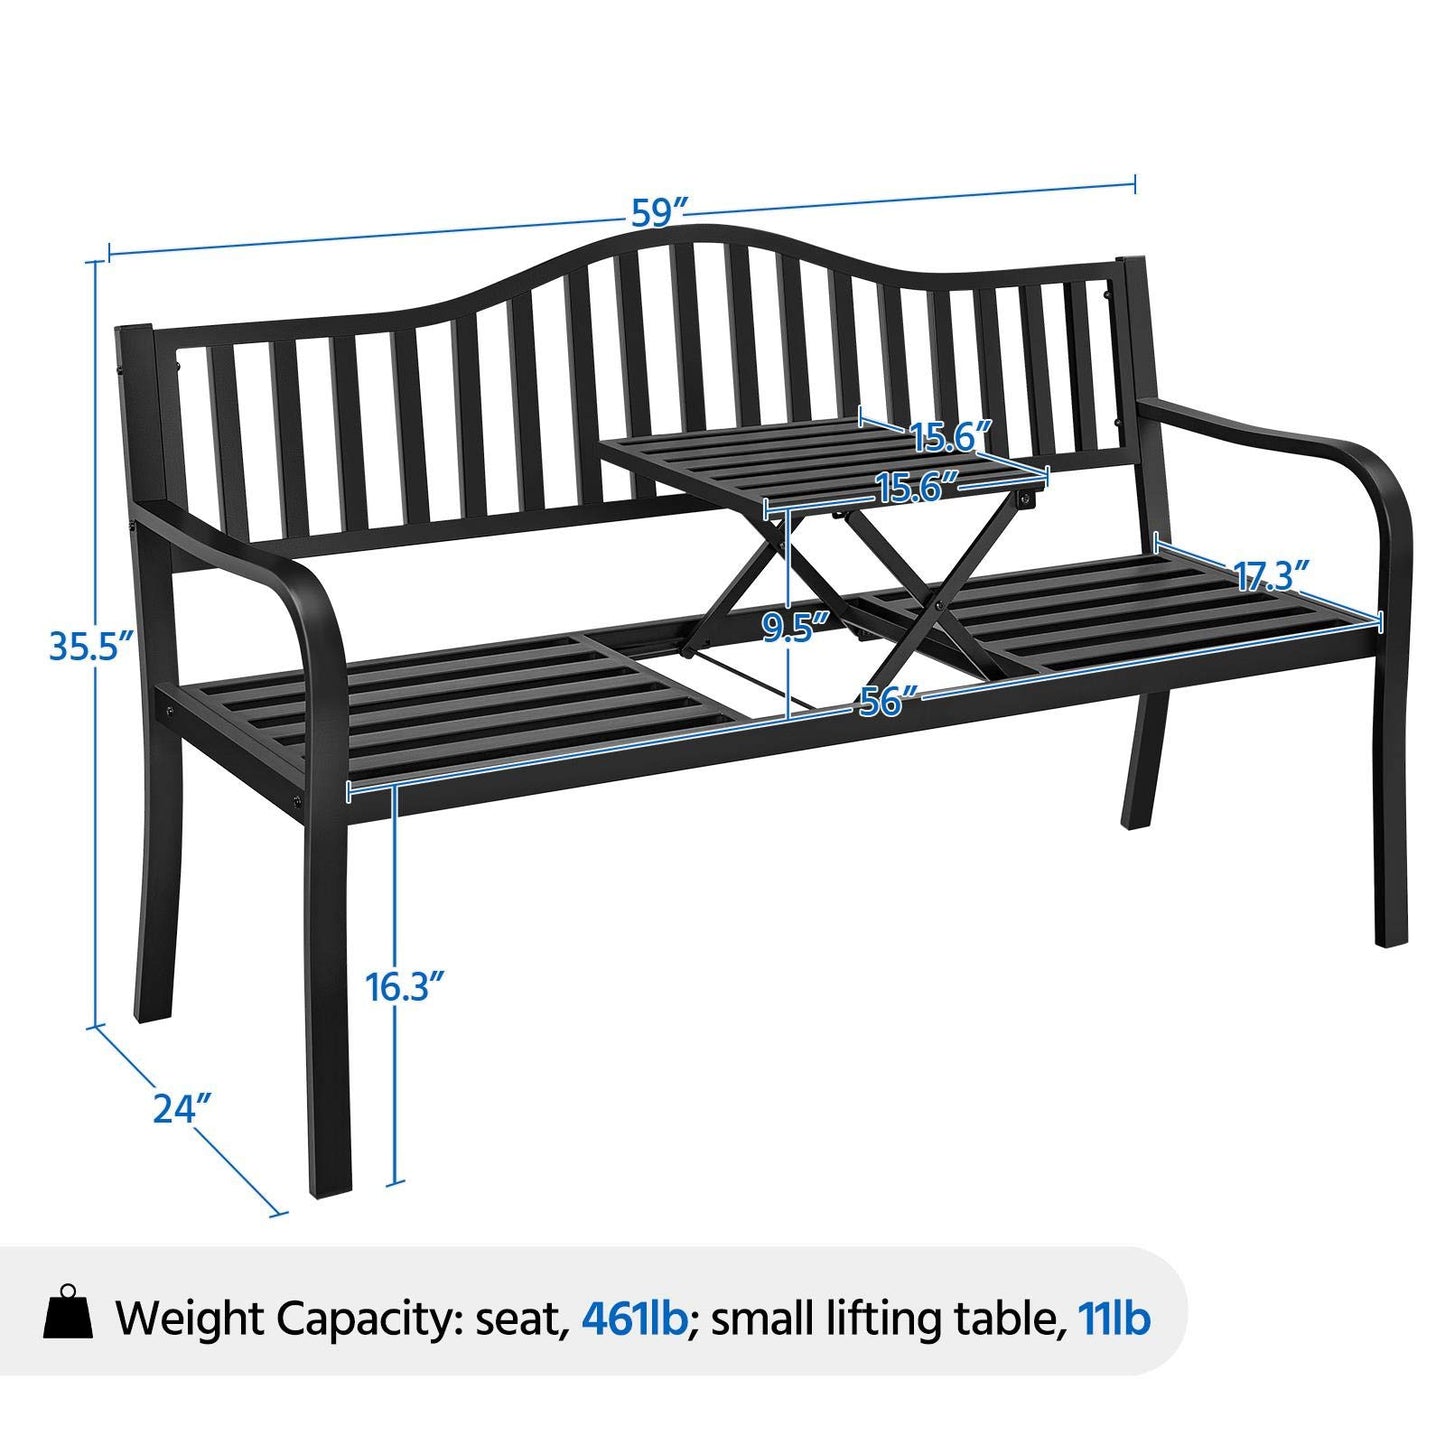 Yaheetech Outdoor Garden Bench w/Pullout Middle Table, Metal Patio Bench, Front Porch Bench for Backyard, Weather-Resistant Frame, Patio Seating for 2-3 Person, Black